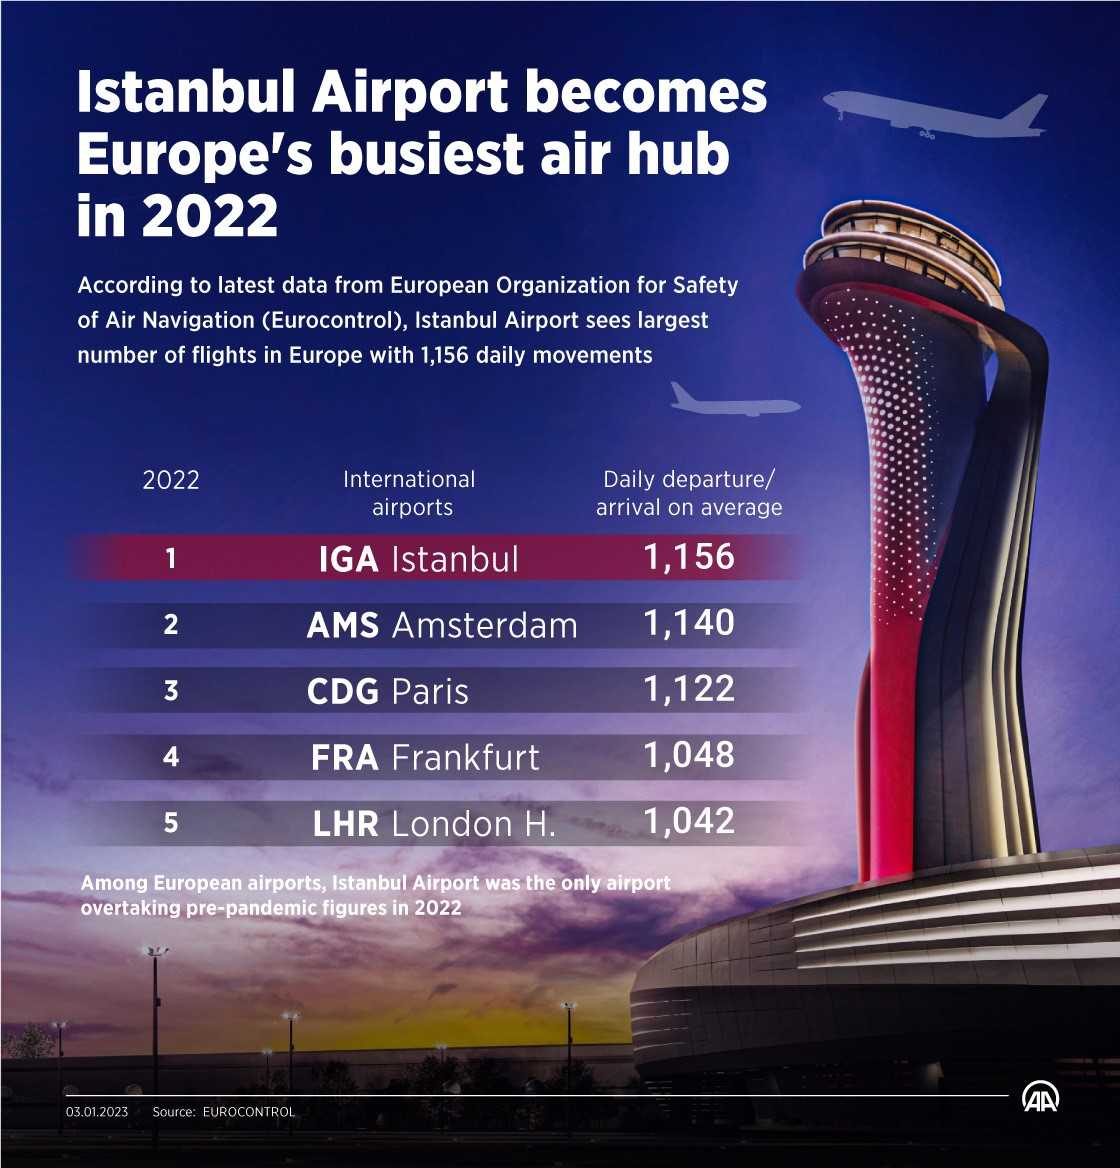 Istanbul Airport becomes Europe's busiest air hub in 2022